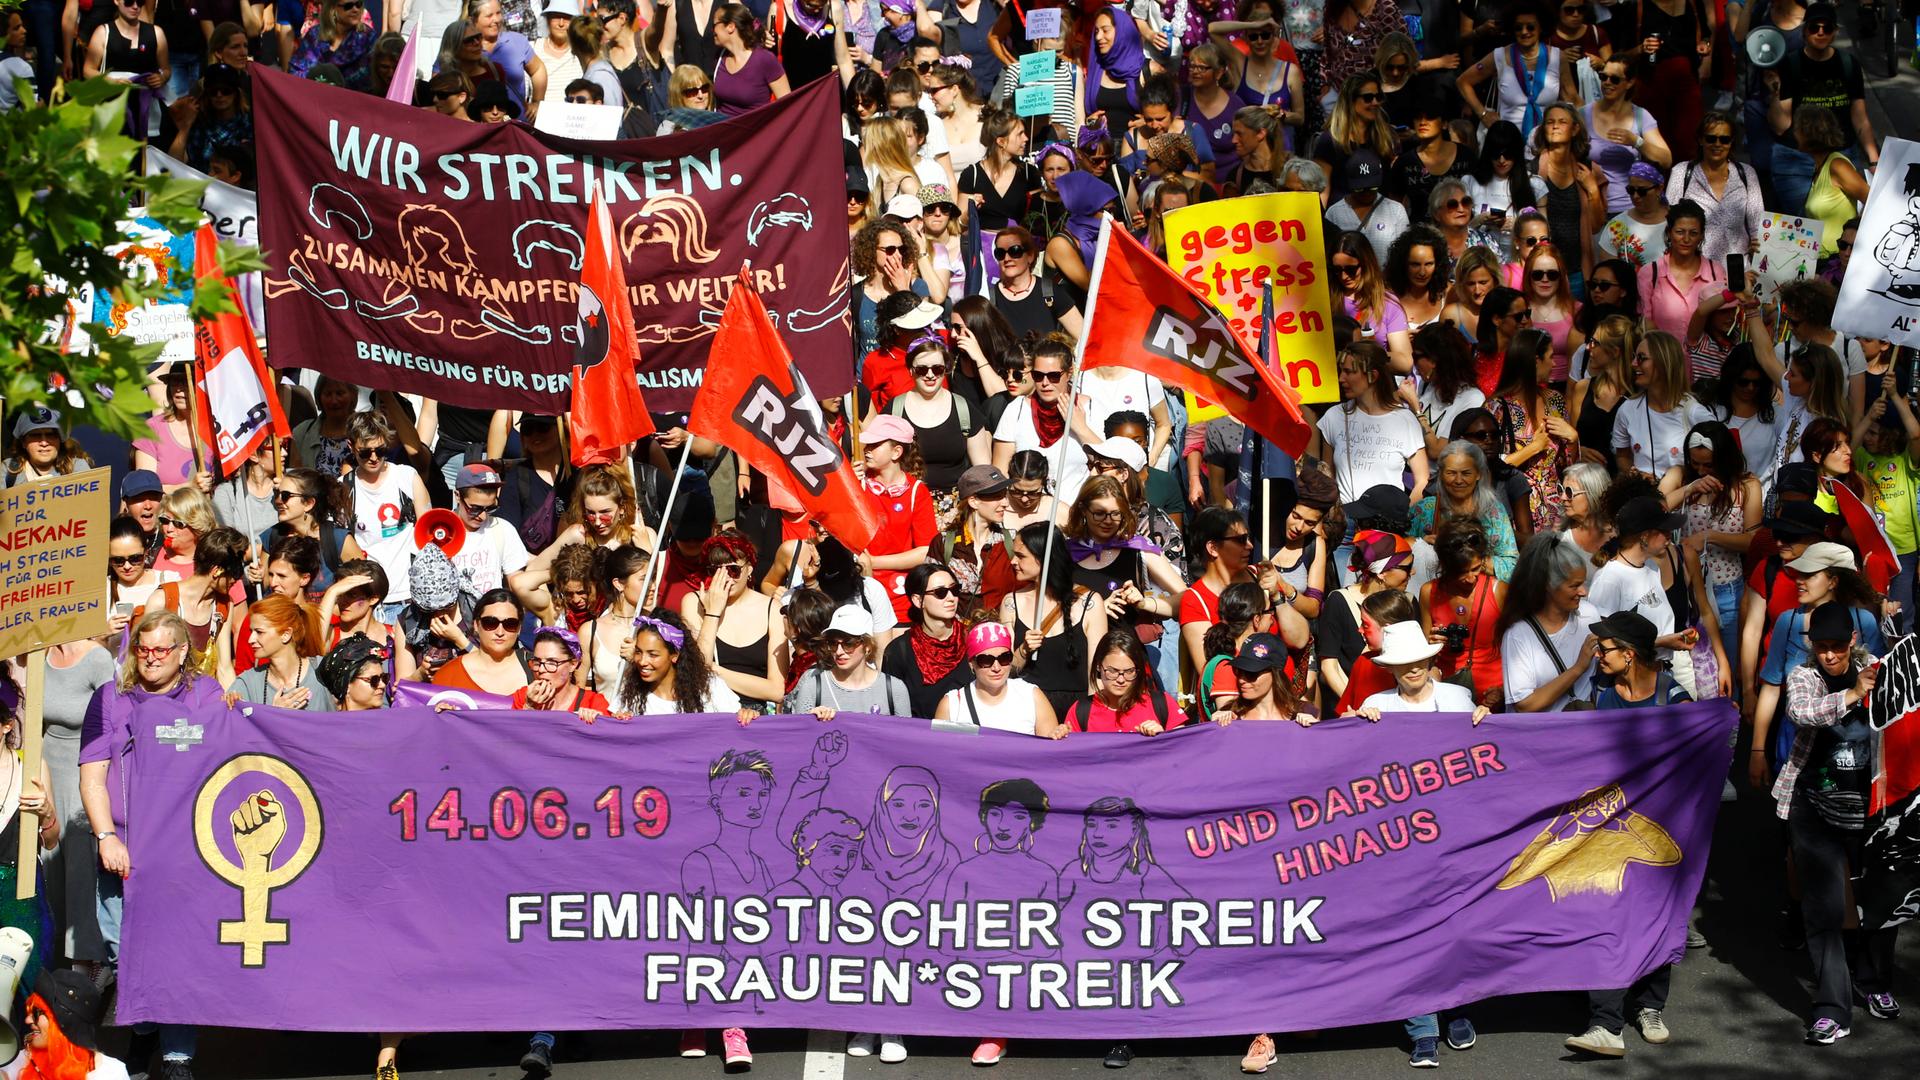 Protesters carry banners and placards at a demonstration during a women's strike (Frauenstreik) in Zurich, Switzerland June 14, 2019.